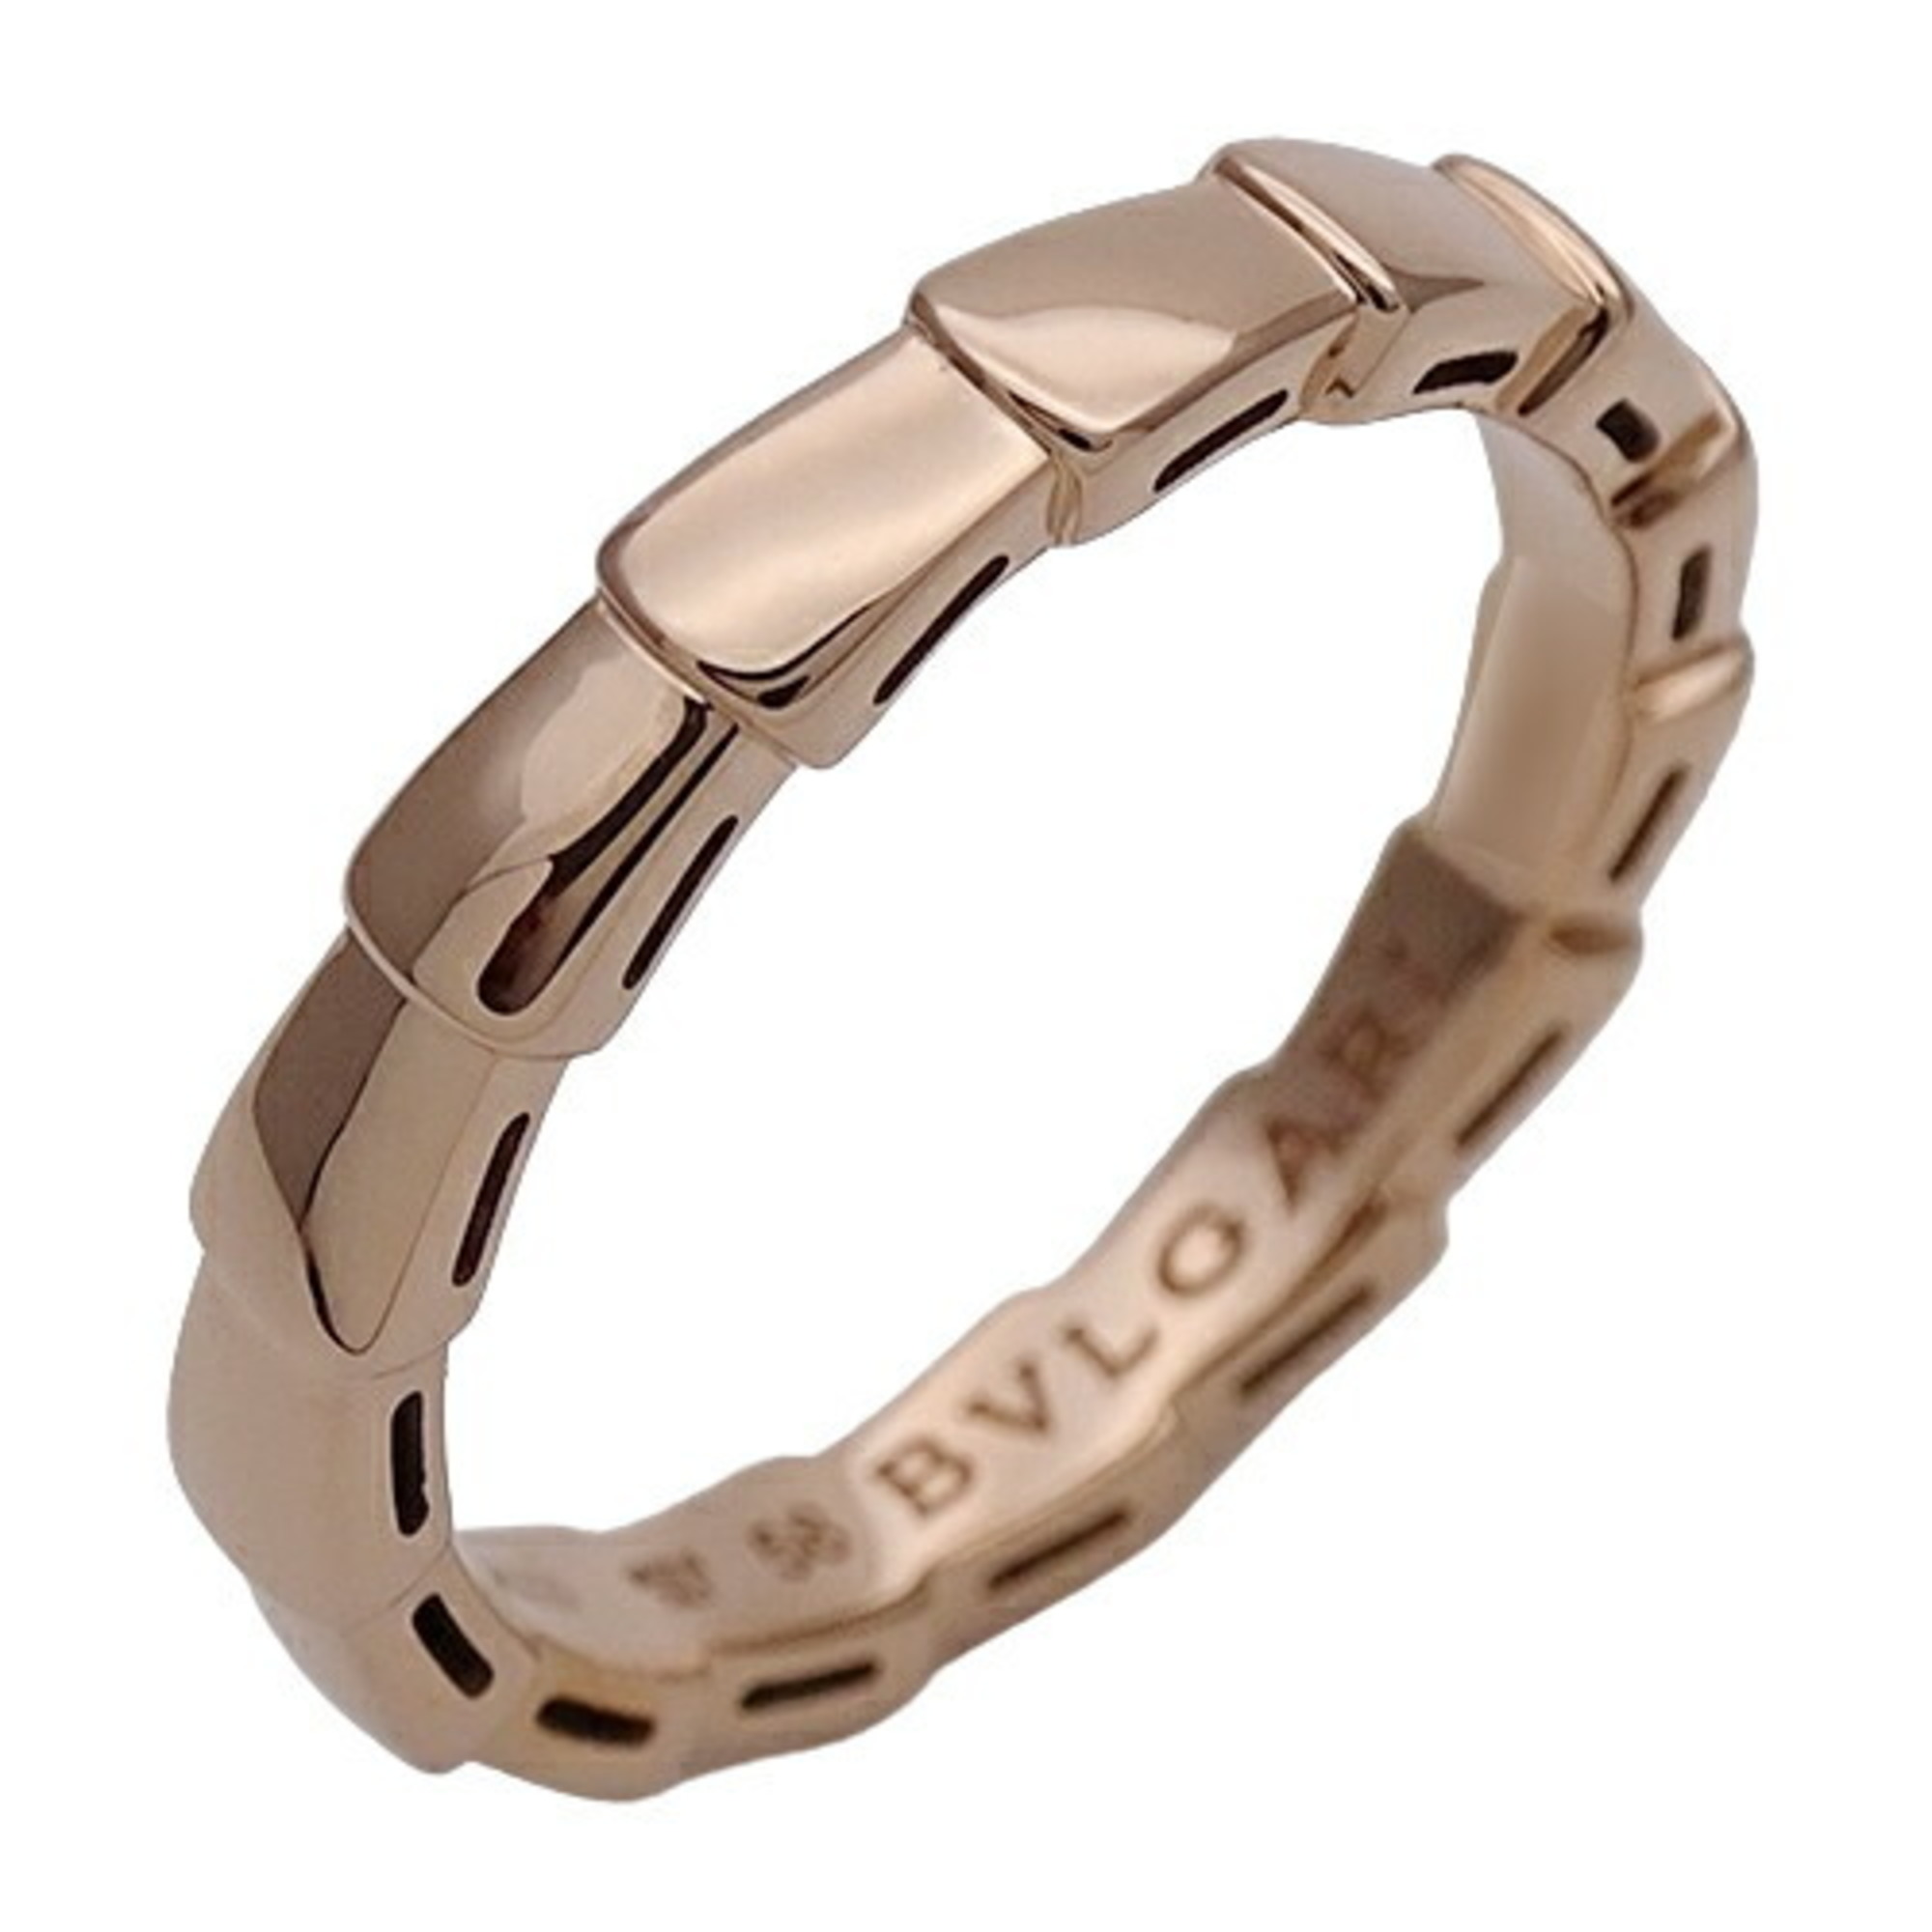 BVLGARI Ring for Women and Men, 750PG Serpenti Viper Pink Gold #58, Size 17.5, Polished